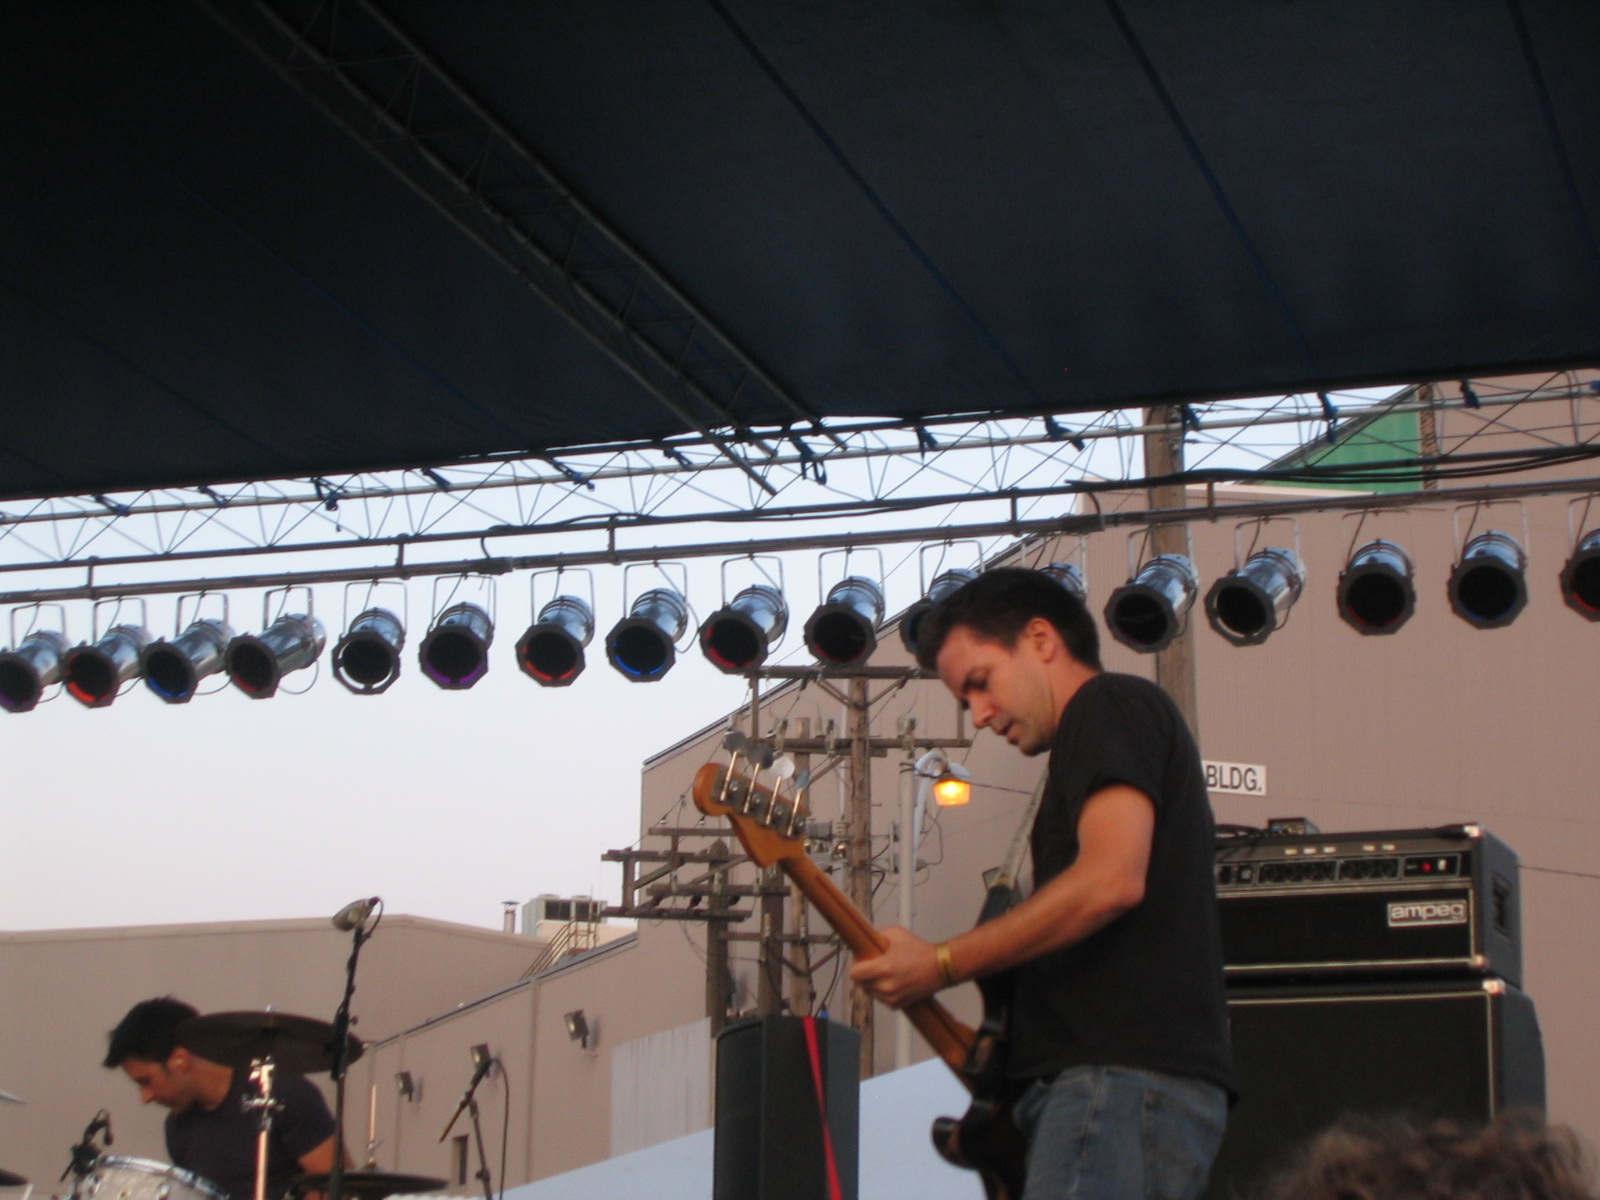 a man is playing an electric guitar on stage